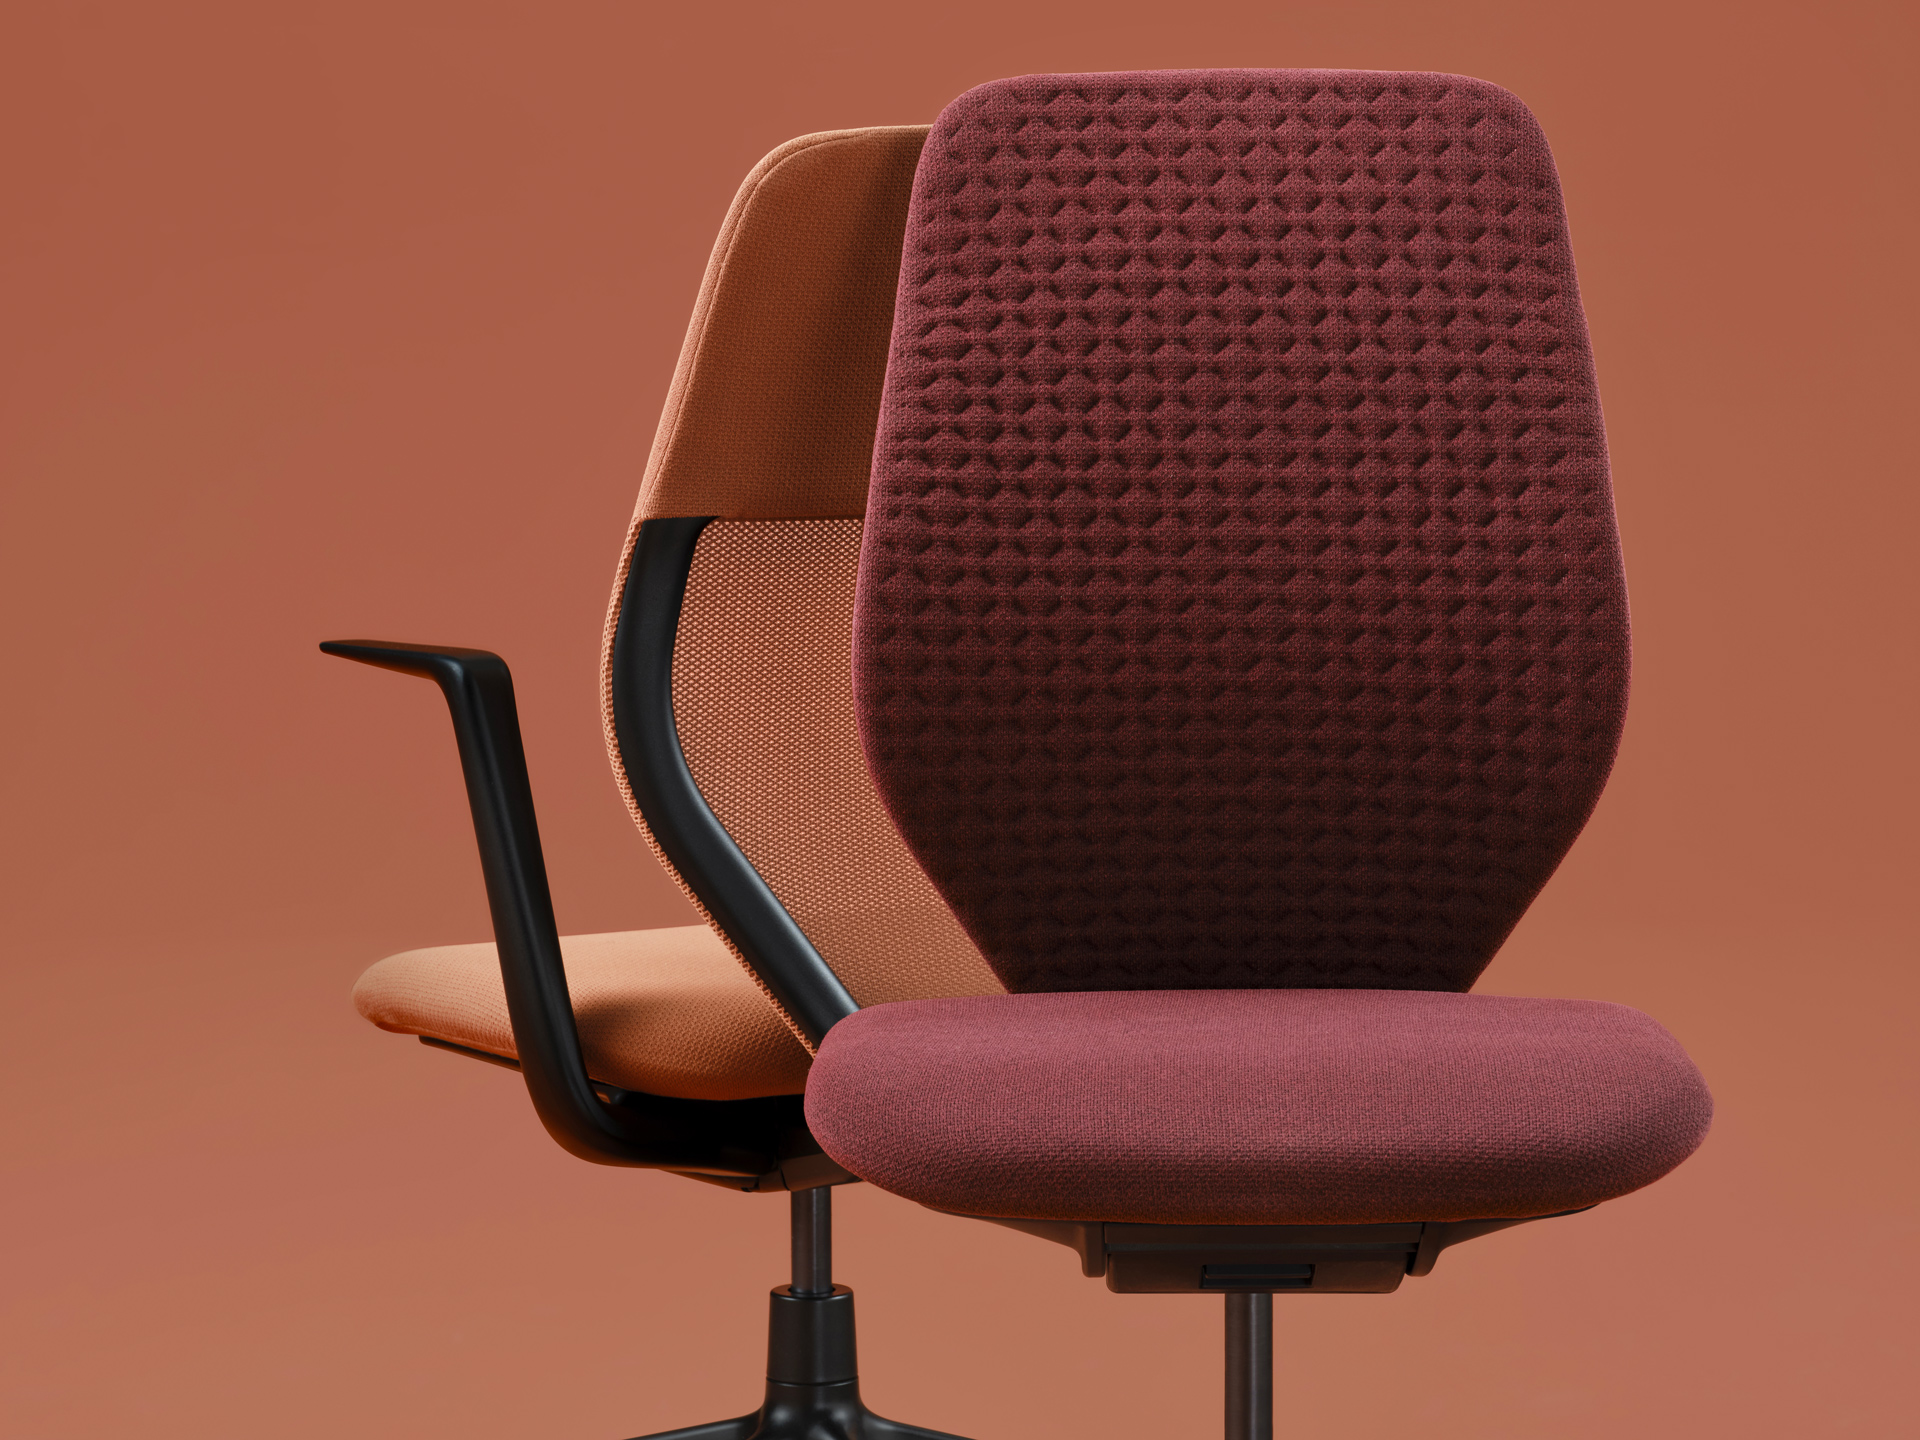 Vitra - ACX Light Office chair